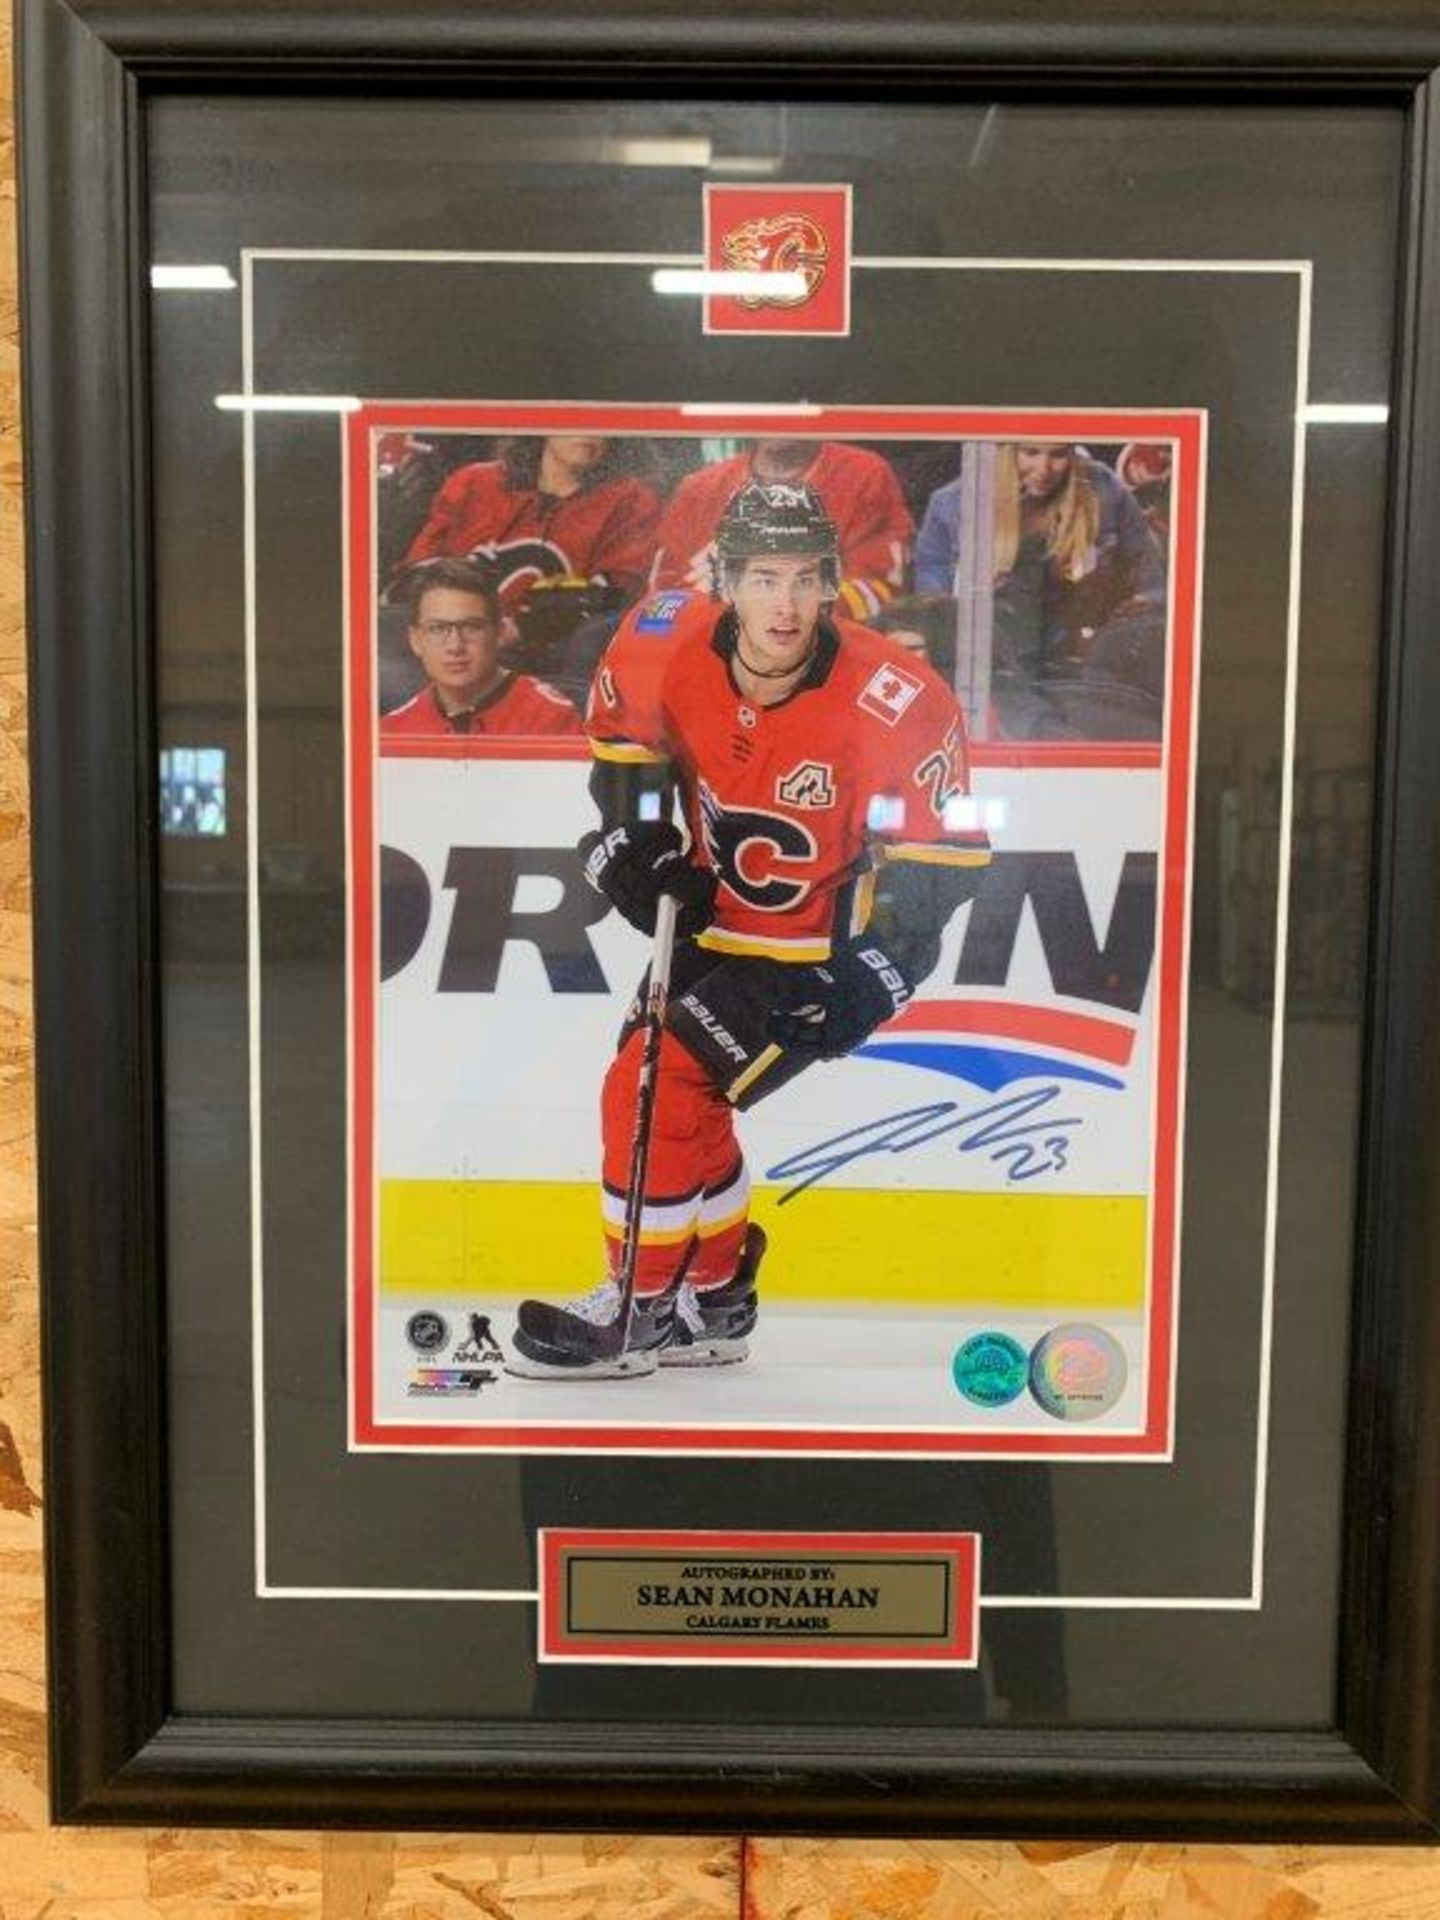 FRAMED AUTOGRAPHED SEAN MONAHAN PICTURE "NOT VERIFIED"